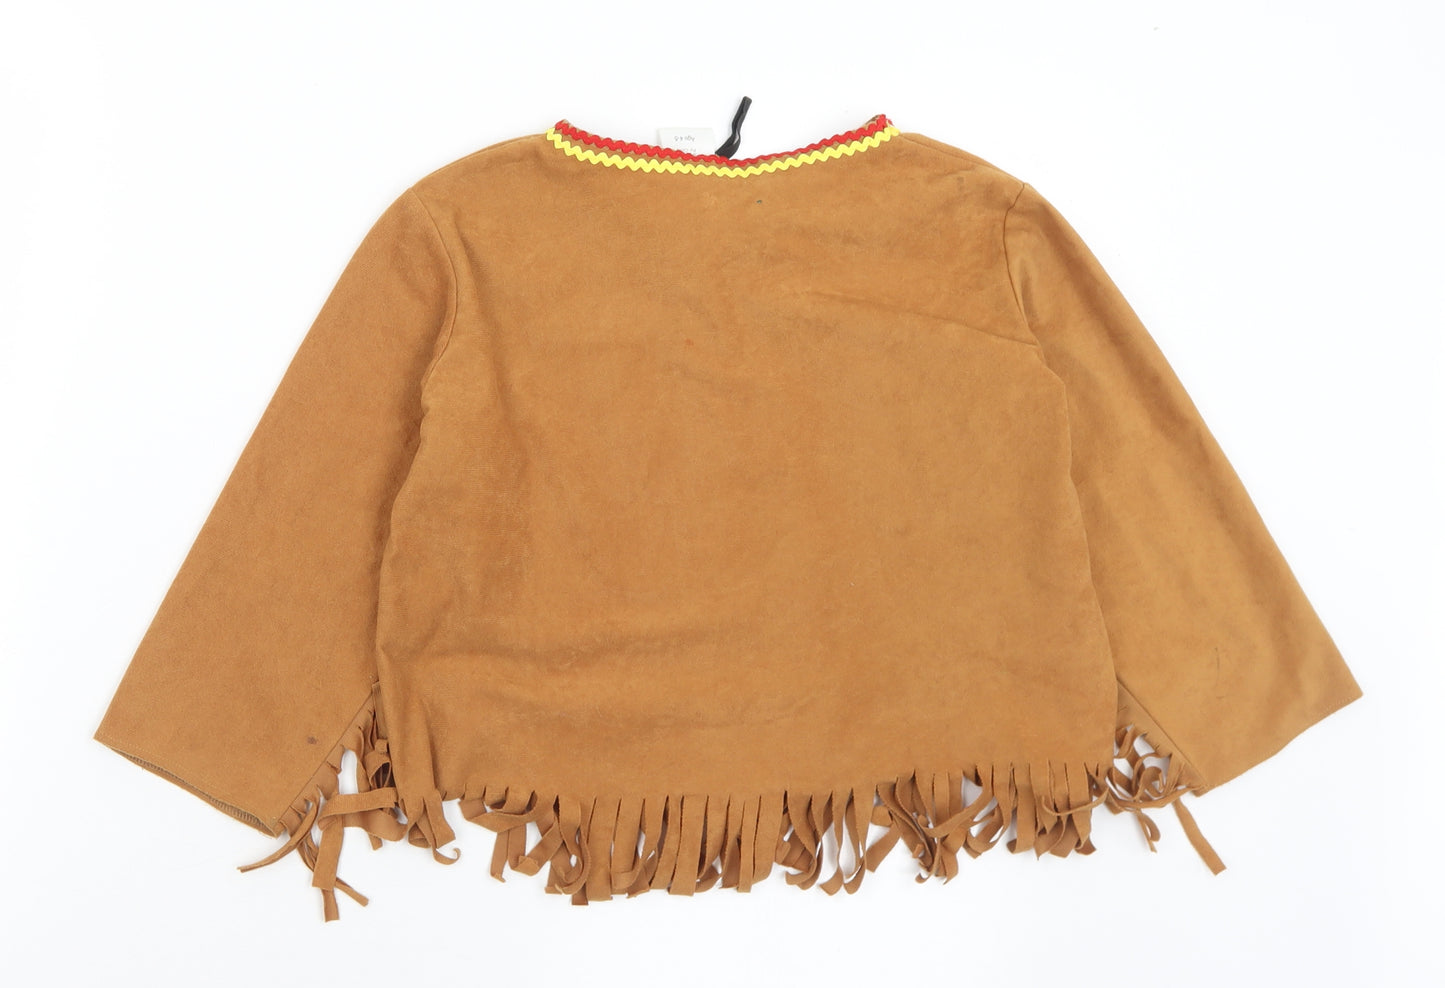 Celia Boys Brown V-Neck  Polyester Pullover Jumper Size 4-5 Years   - Indian Fancy Dress